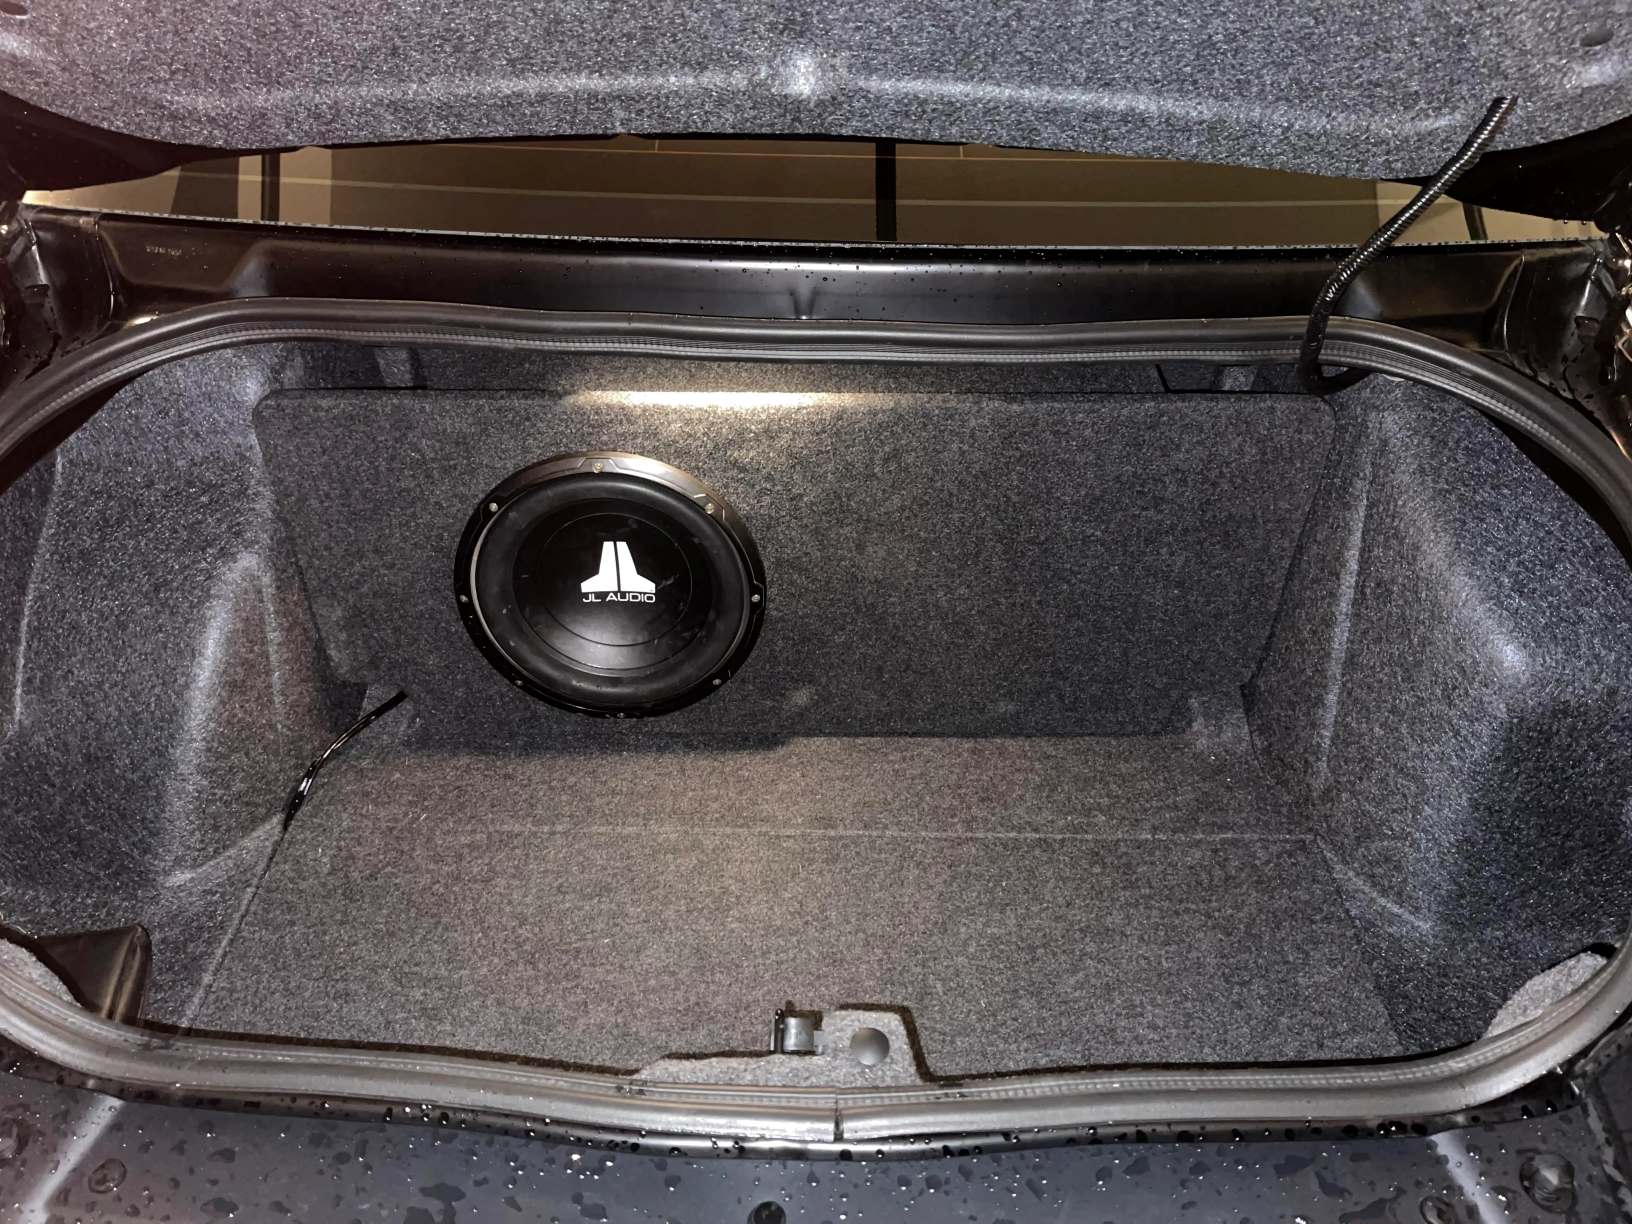 How To Mount Subwoofer Box In Trunk